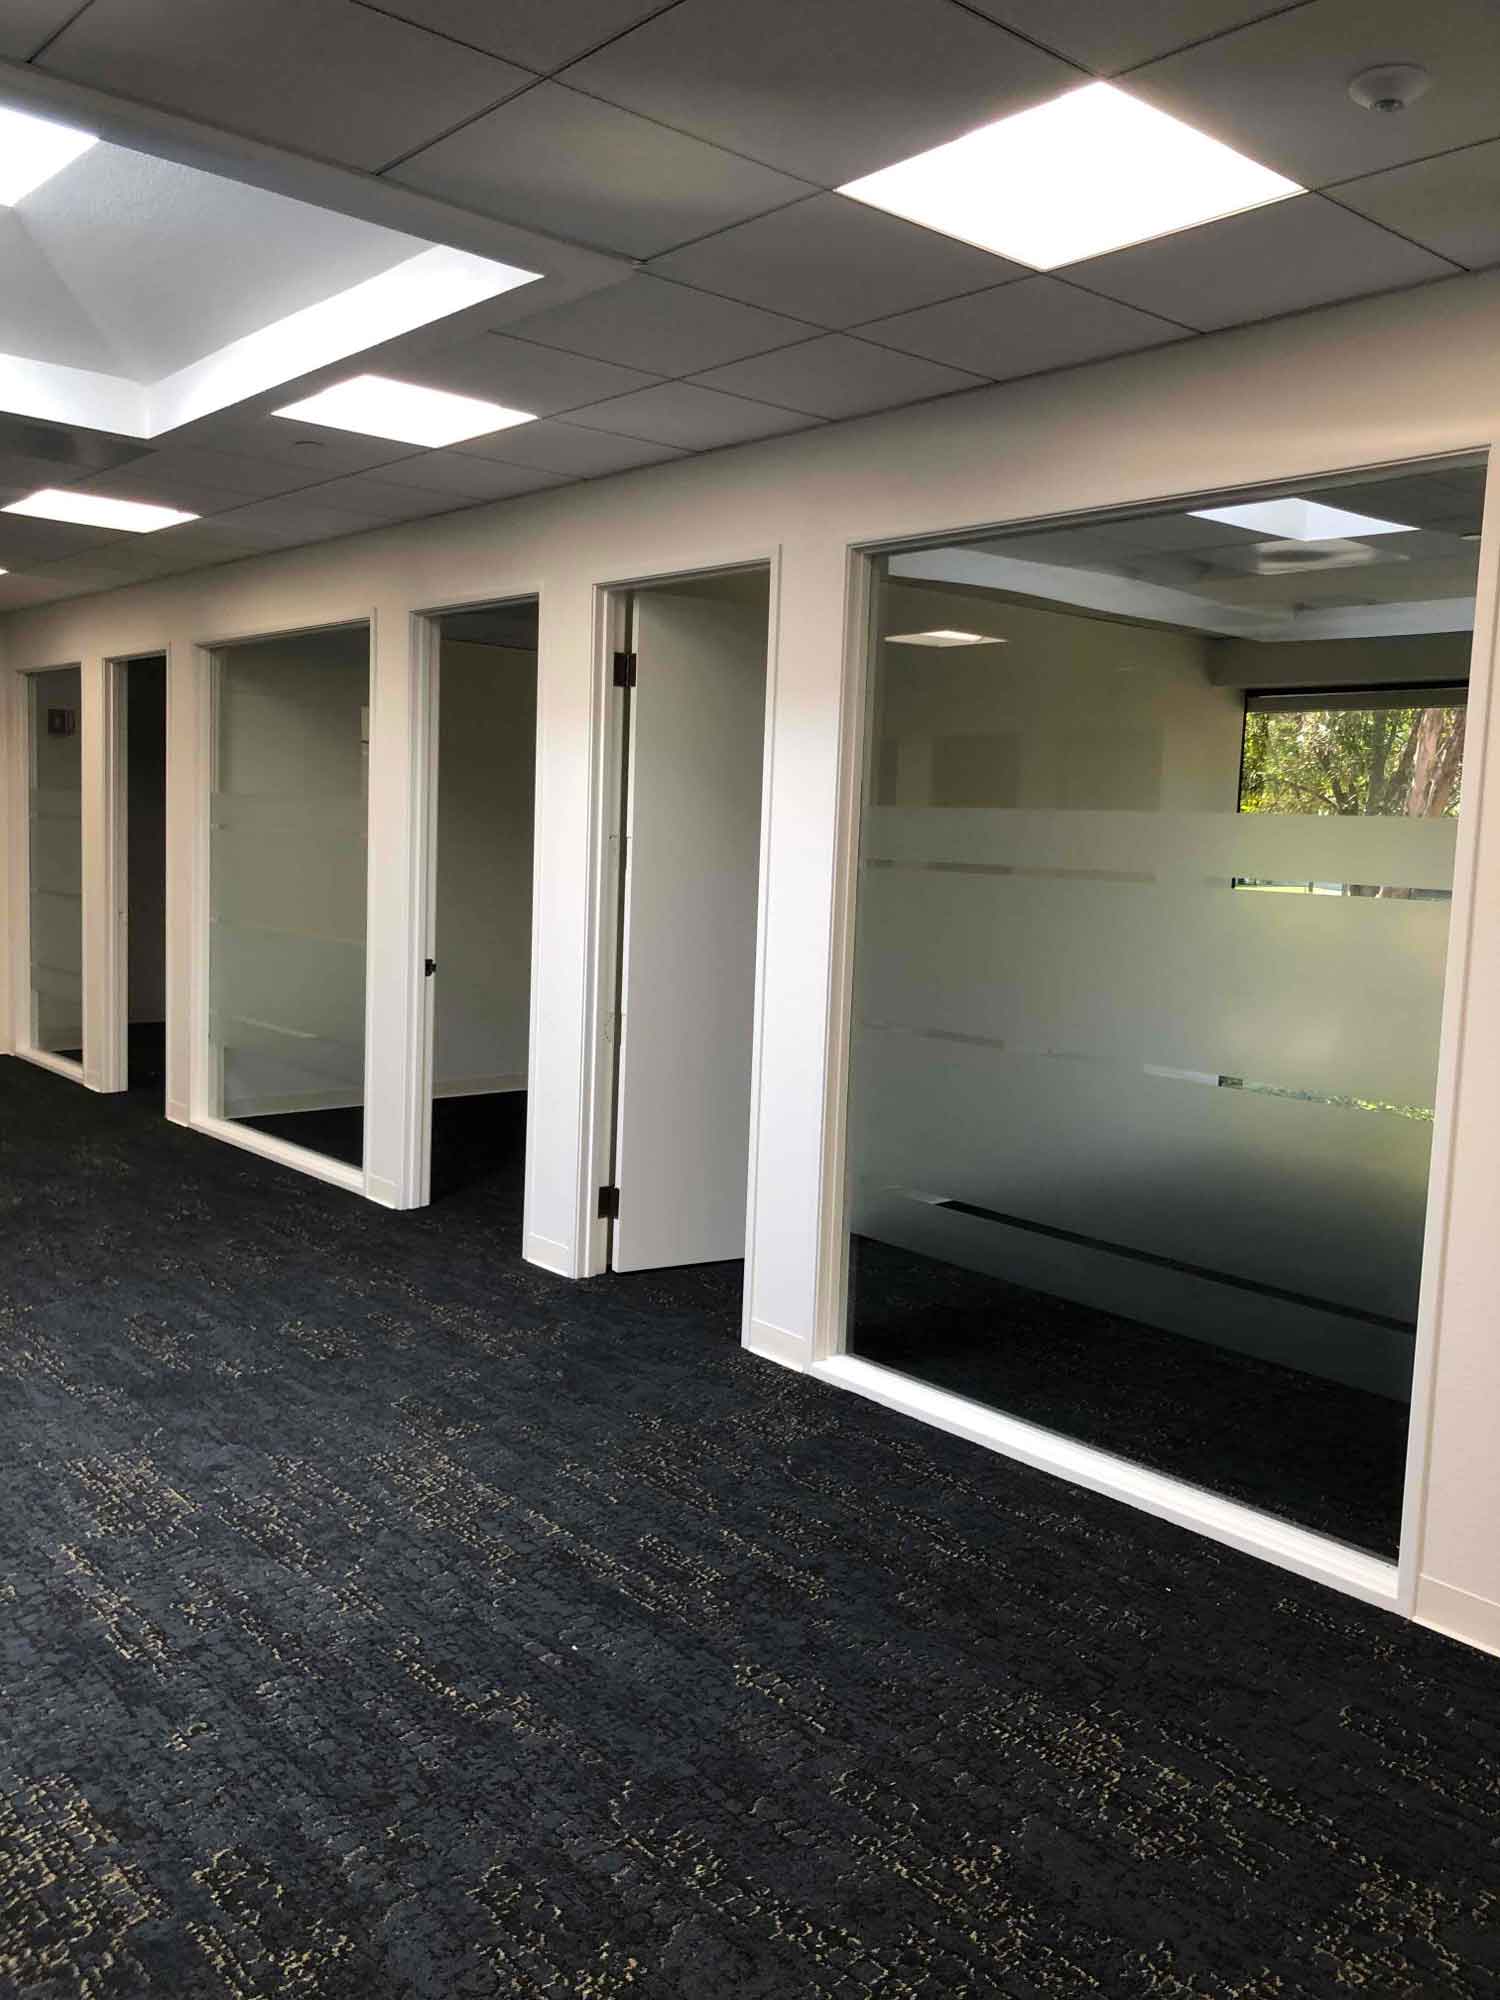 This office in Windsor, CA had the ClimatePro team install 3M Fasara Oslo decorative film on the interior windows and doors